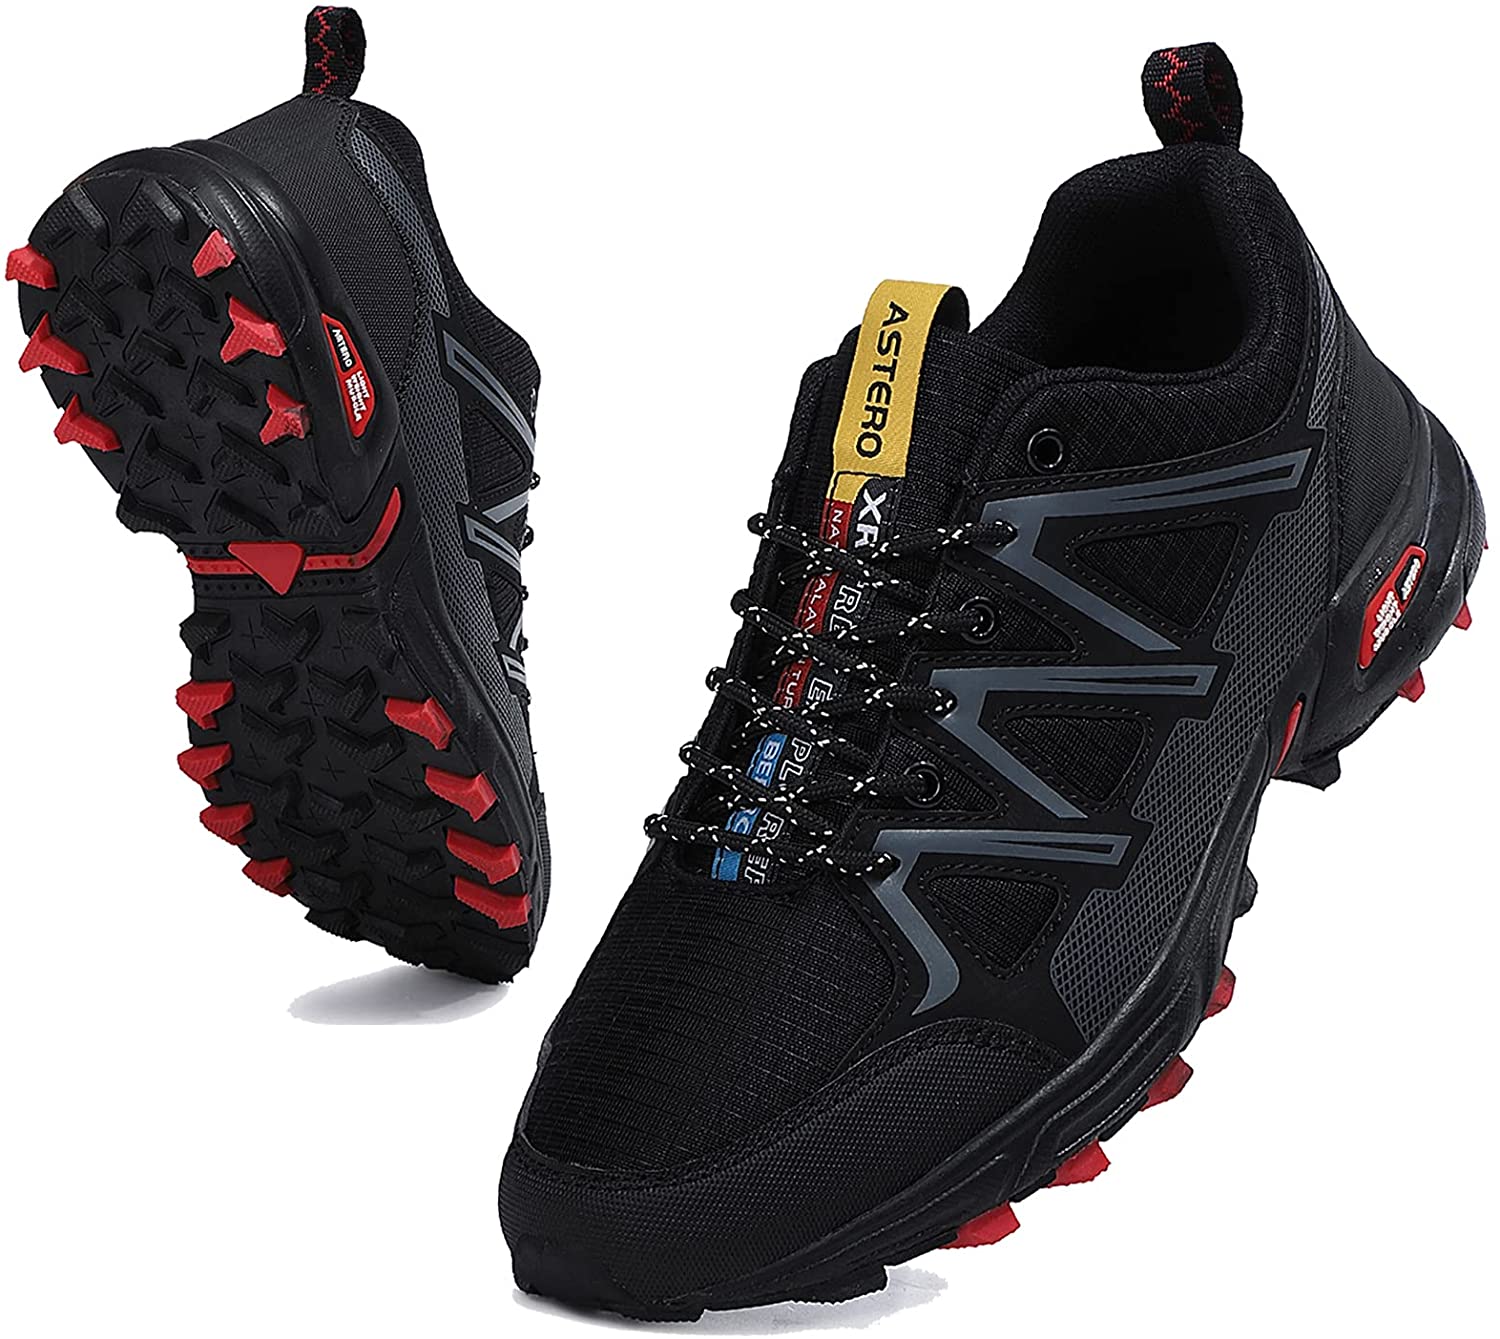 AX BOXING Mens Trail Running Shoes Anti-Skid Walking Shoes Athletic Road Running Footwear 